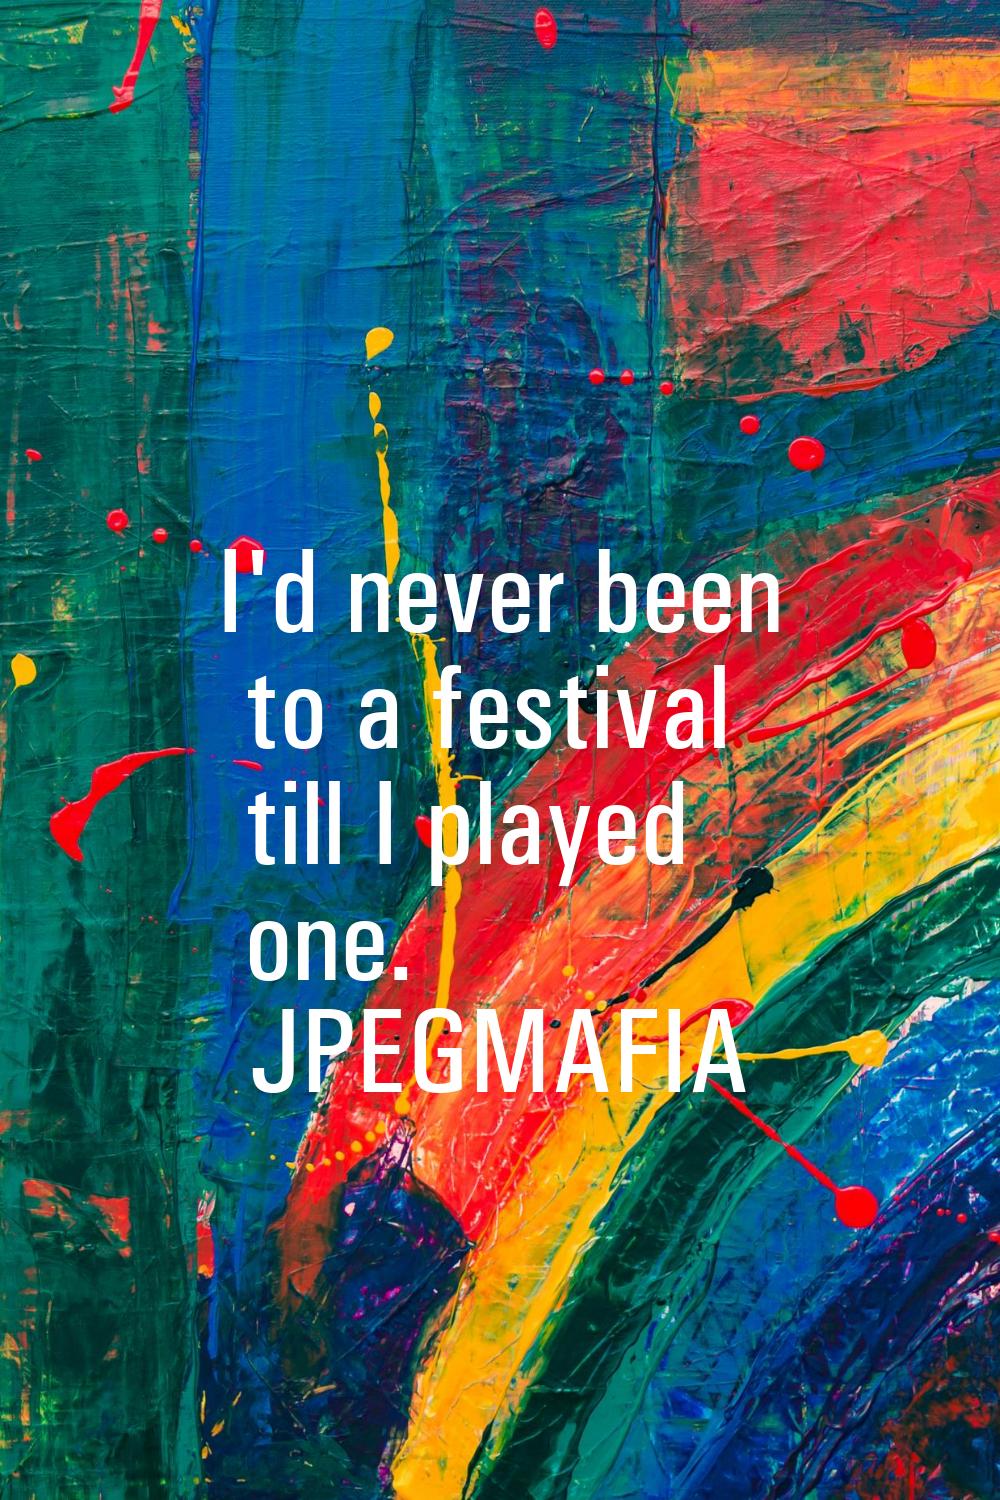 I'd never been to a festival till I played one.